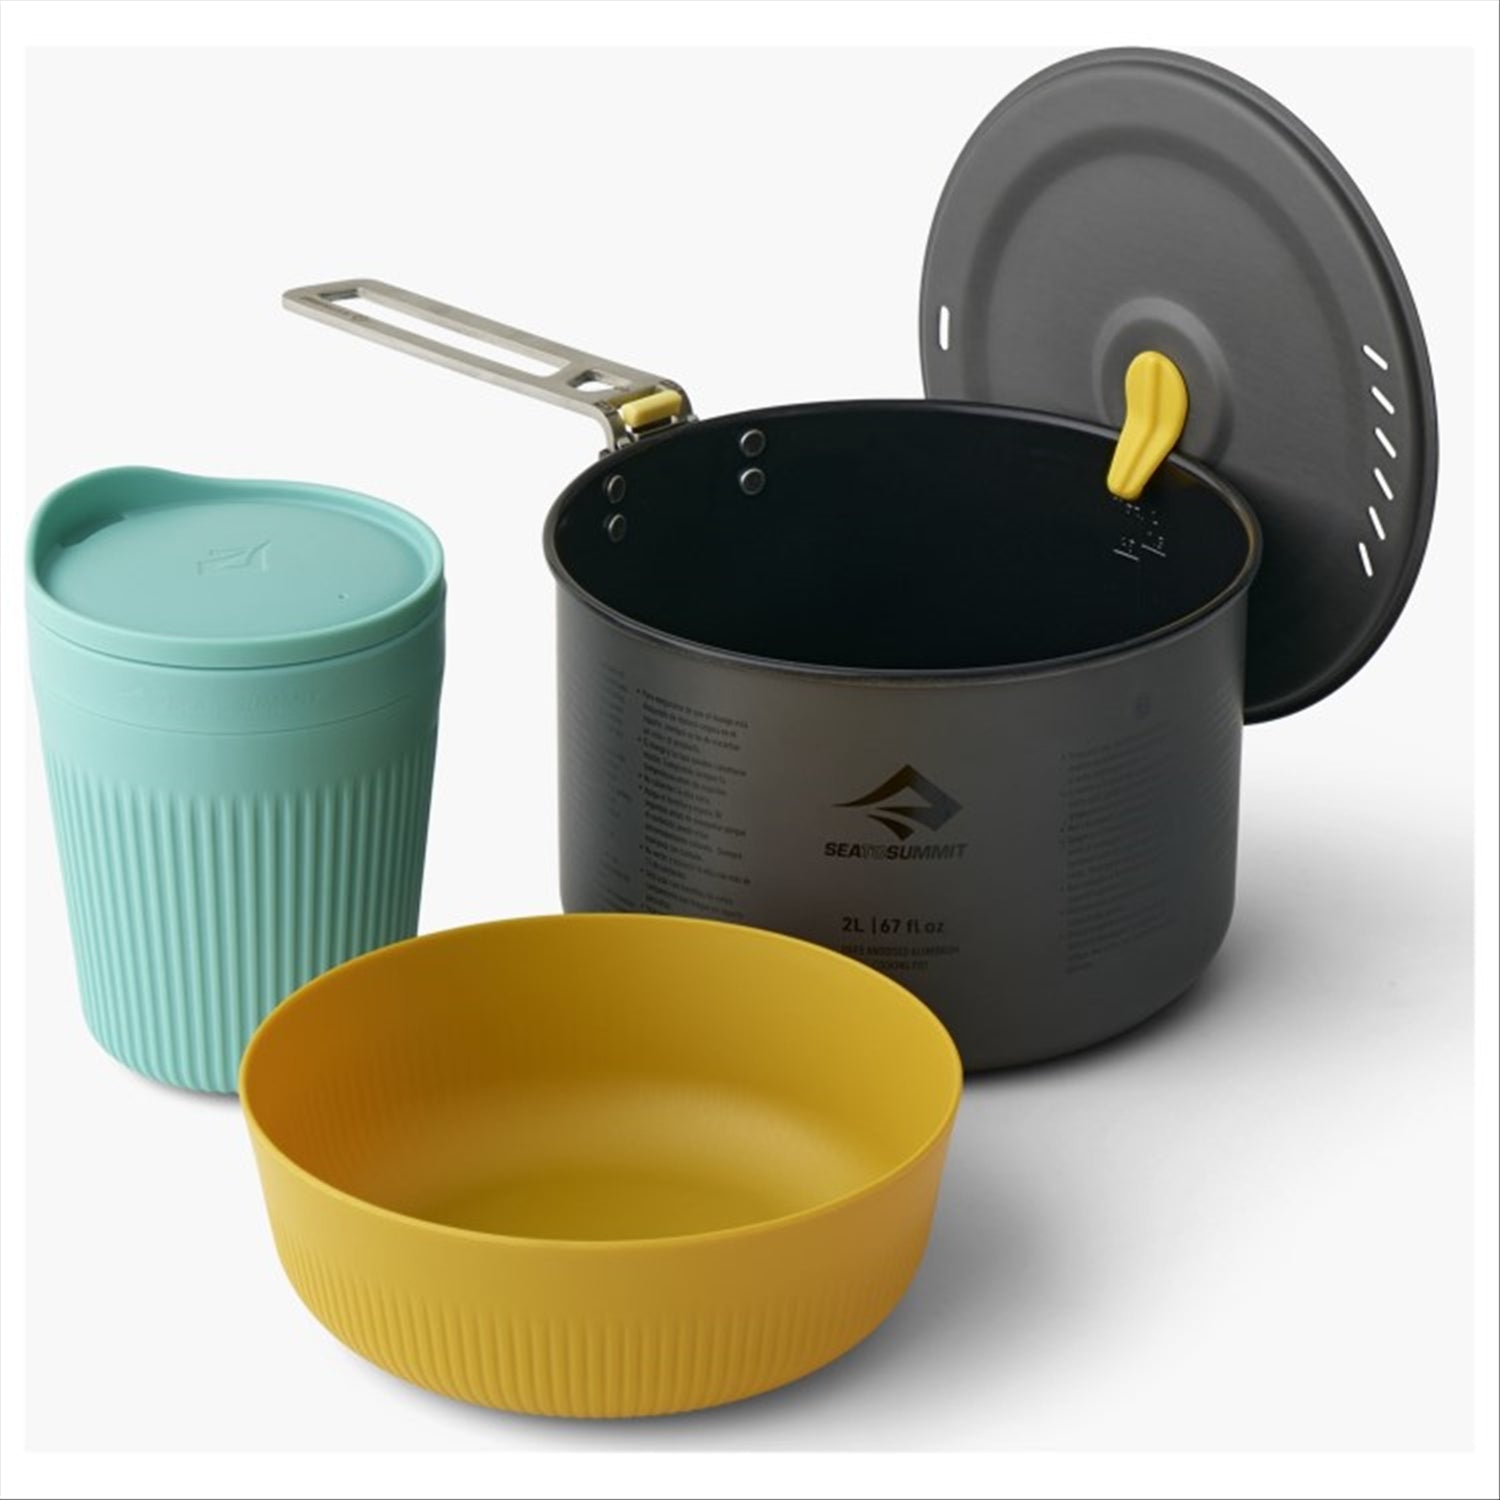 Sea to Summit Sea To Summit Frontier One Pot Cook Set - 1P, 3 Pieces